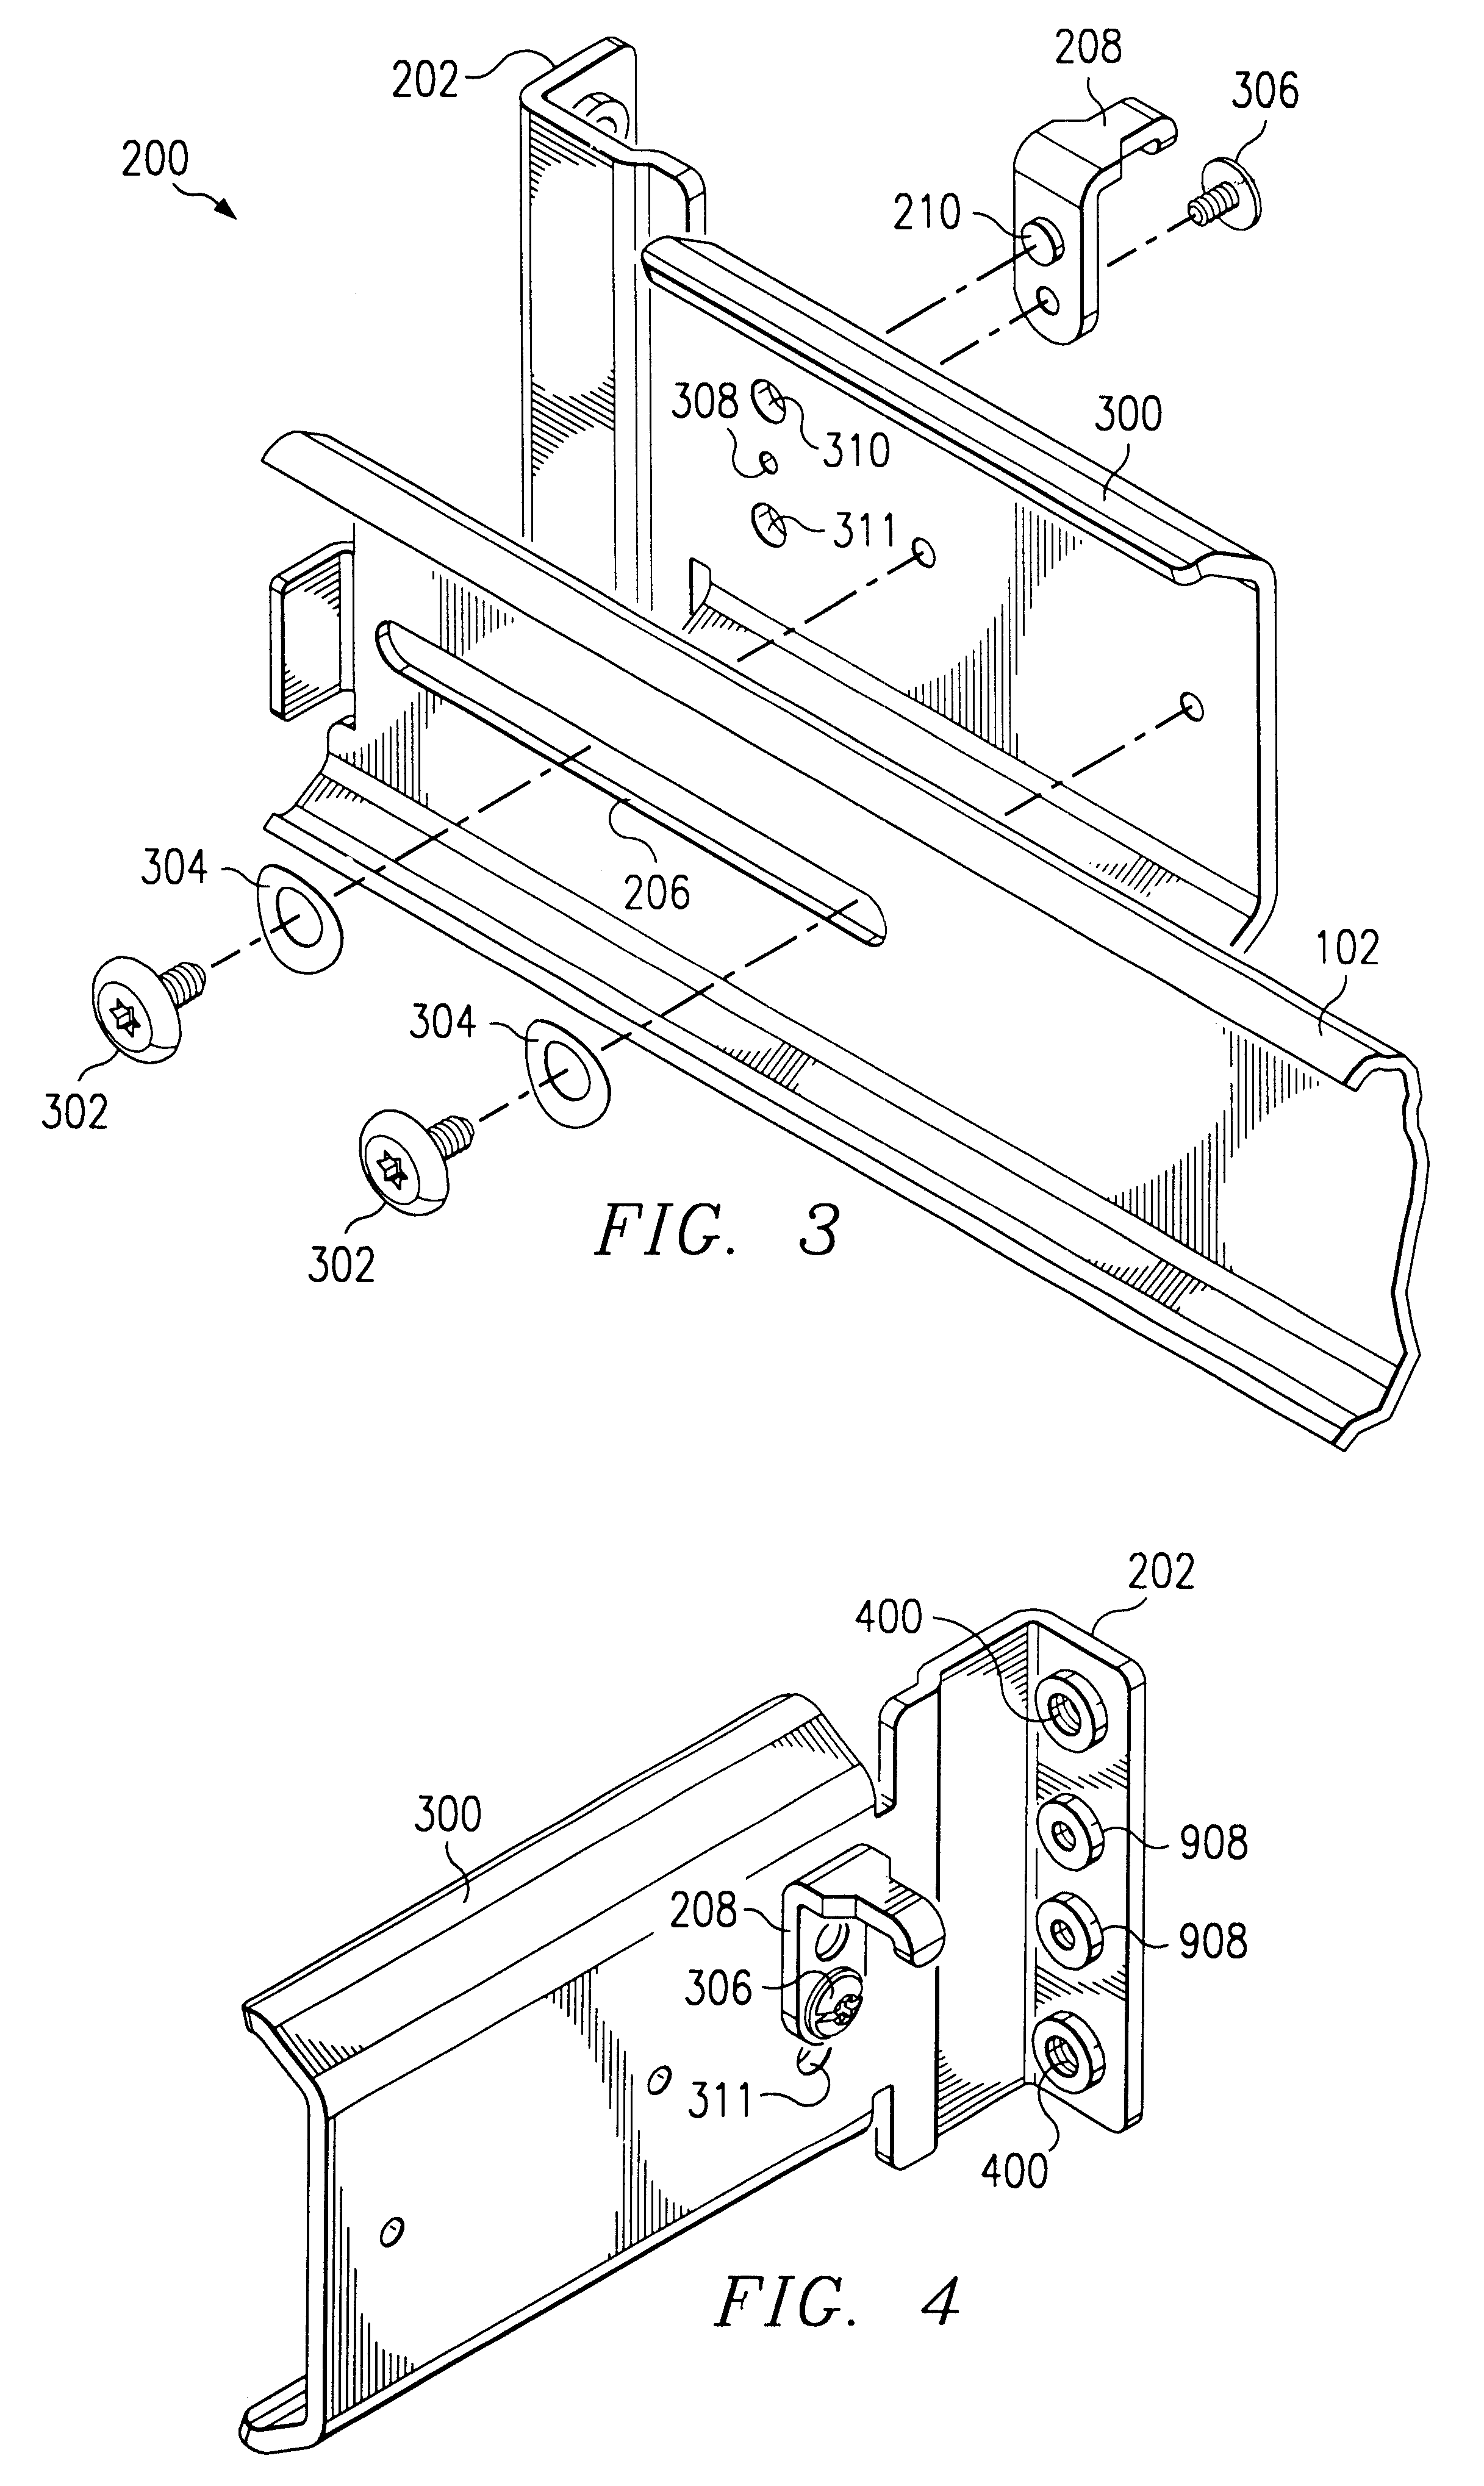 Universal sliding rail assembly for rack mounting computers